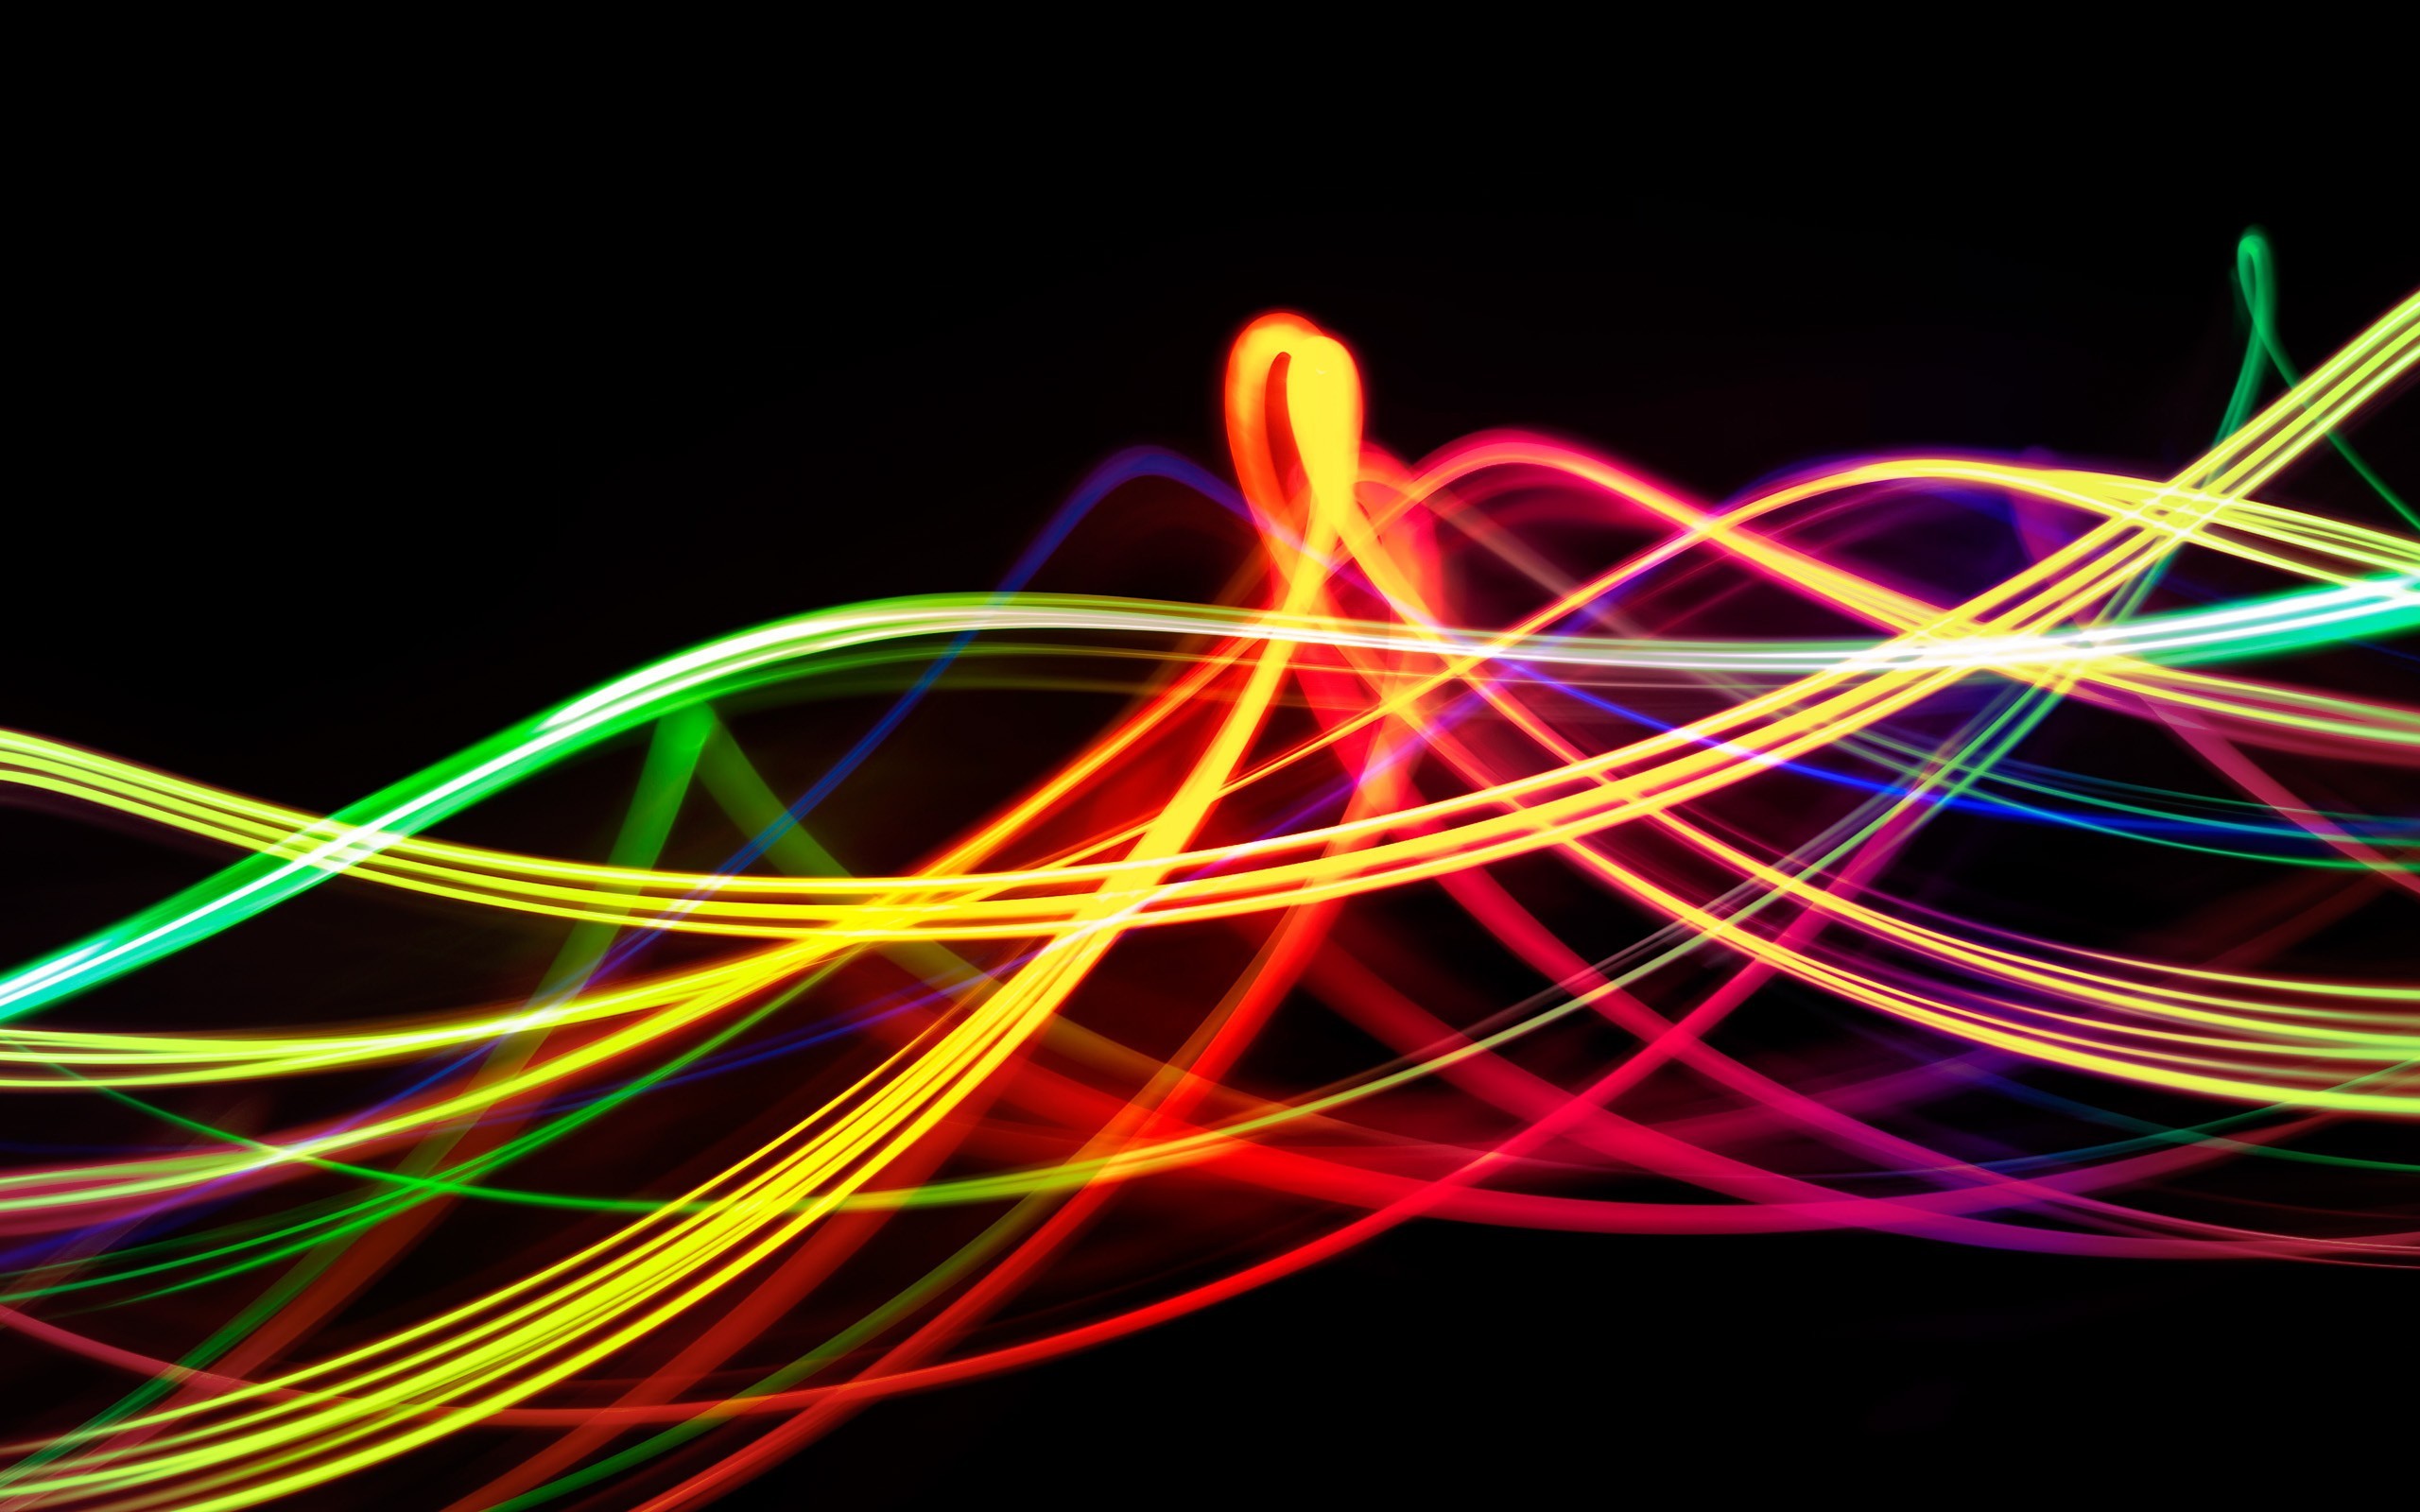 General 2560x1600 streaks lights colorful abstract light trails simple background black background swirls shapes digital glowing